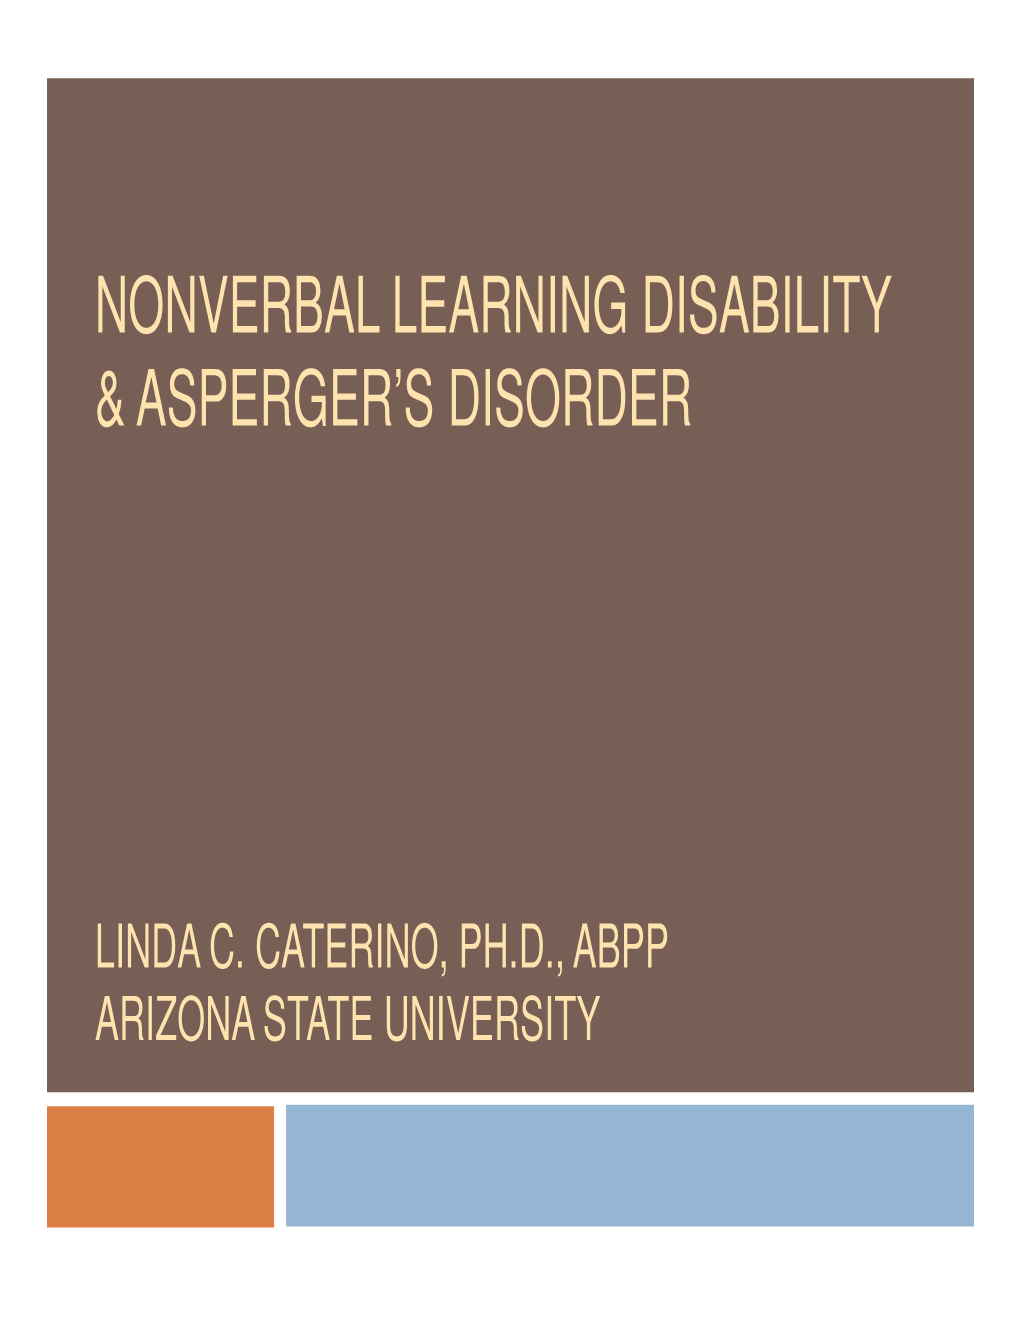 Nonverbal Learning Disability & Asperger's Disorder